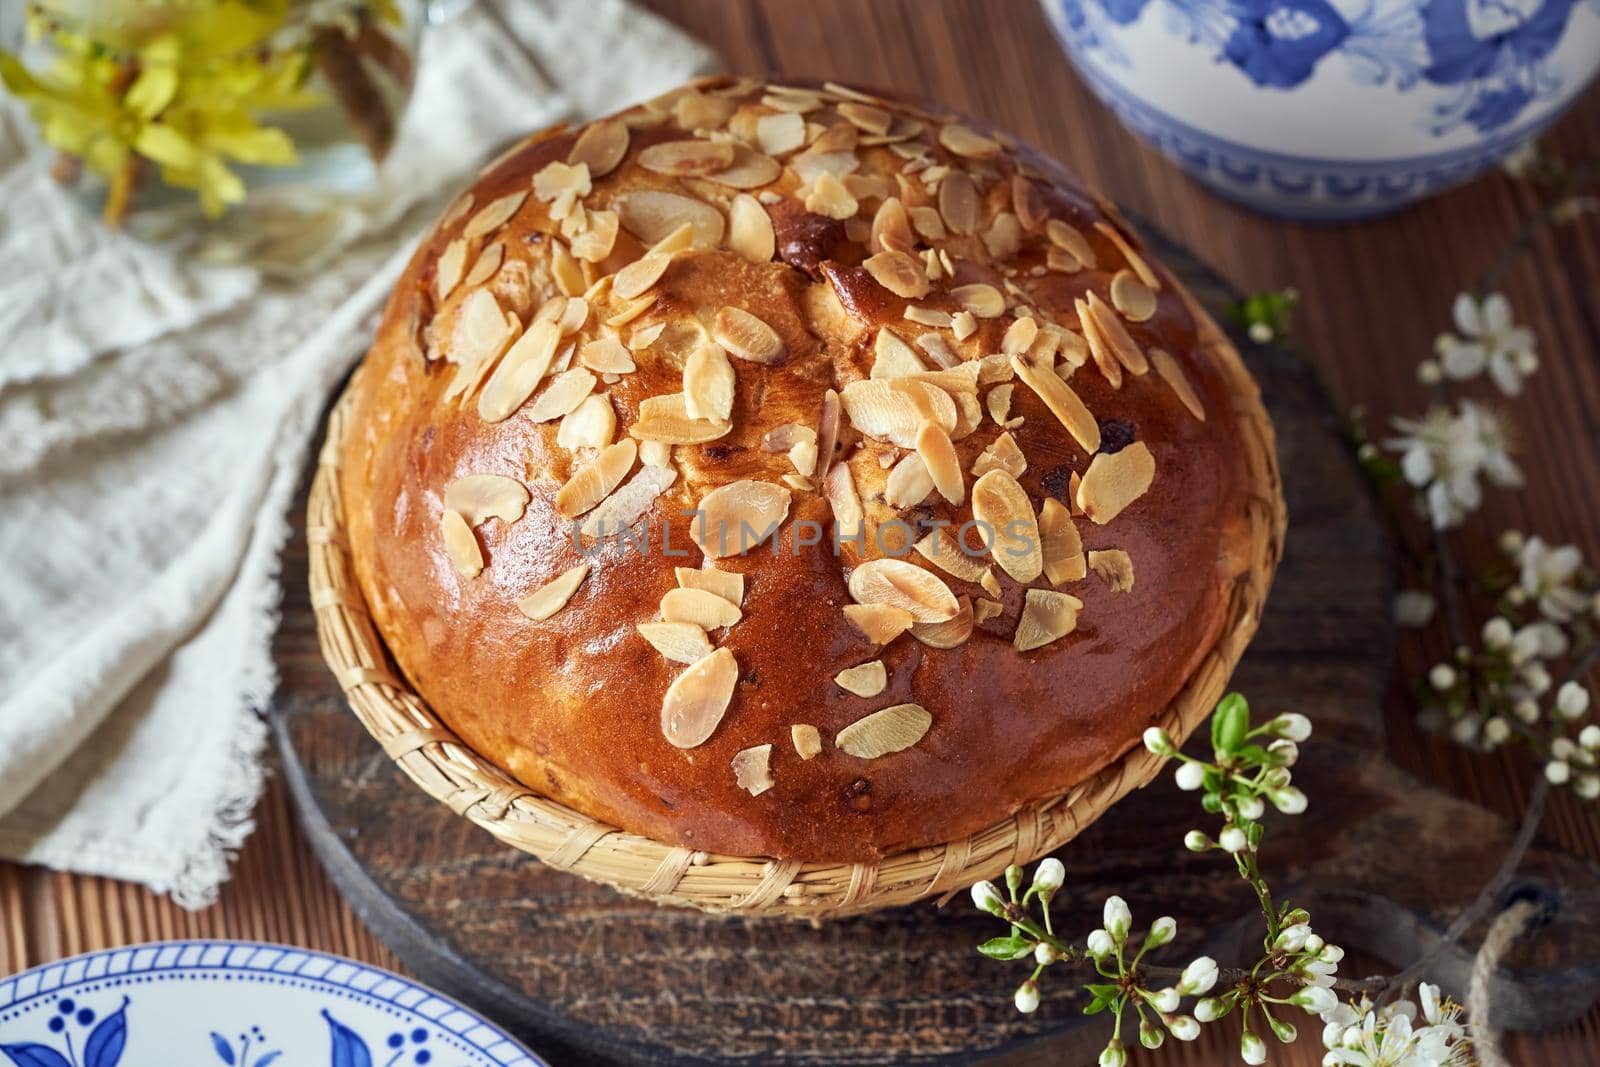 Whole mazanec, traditional Czech sweet Easter pastry, similar to hot cross bun, with blooming branches in spring